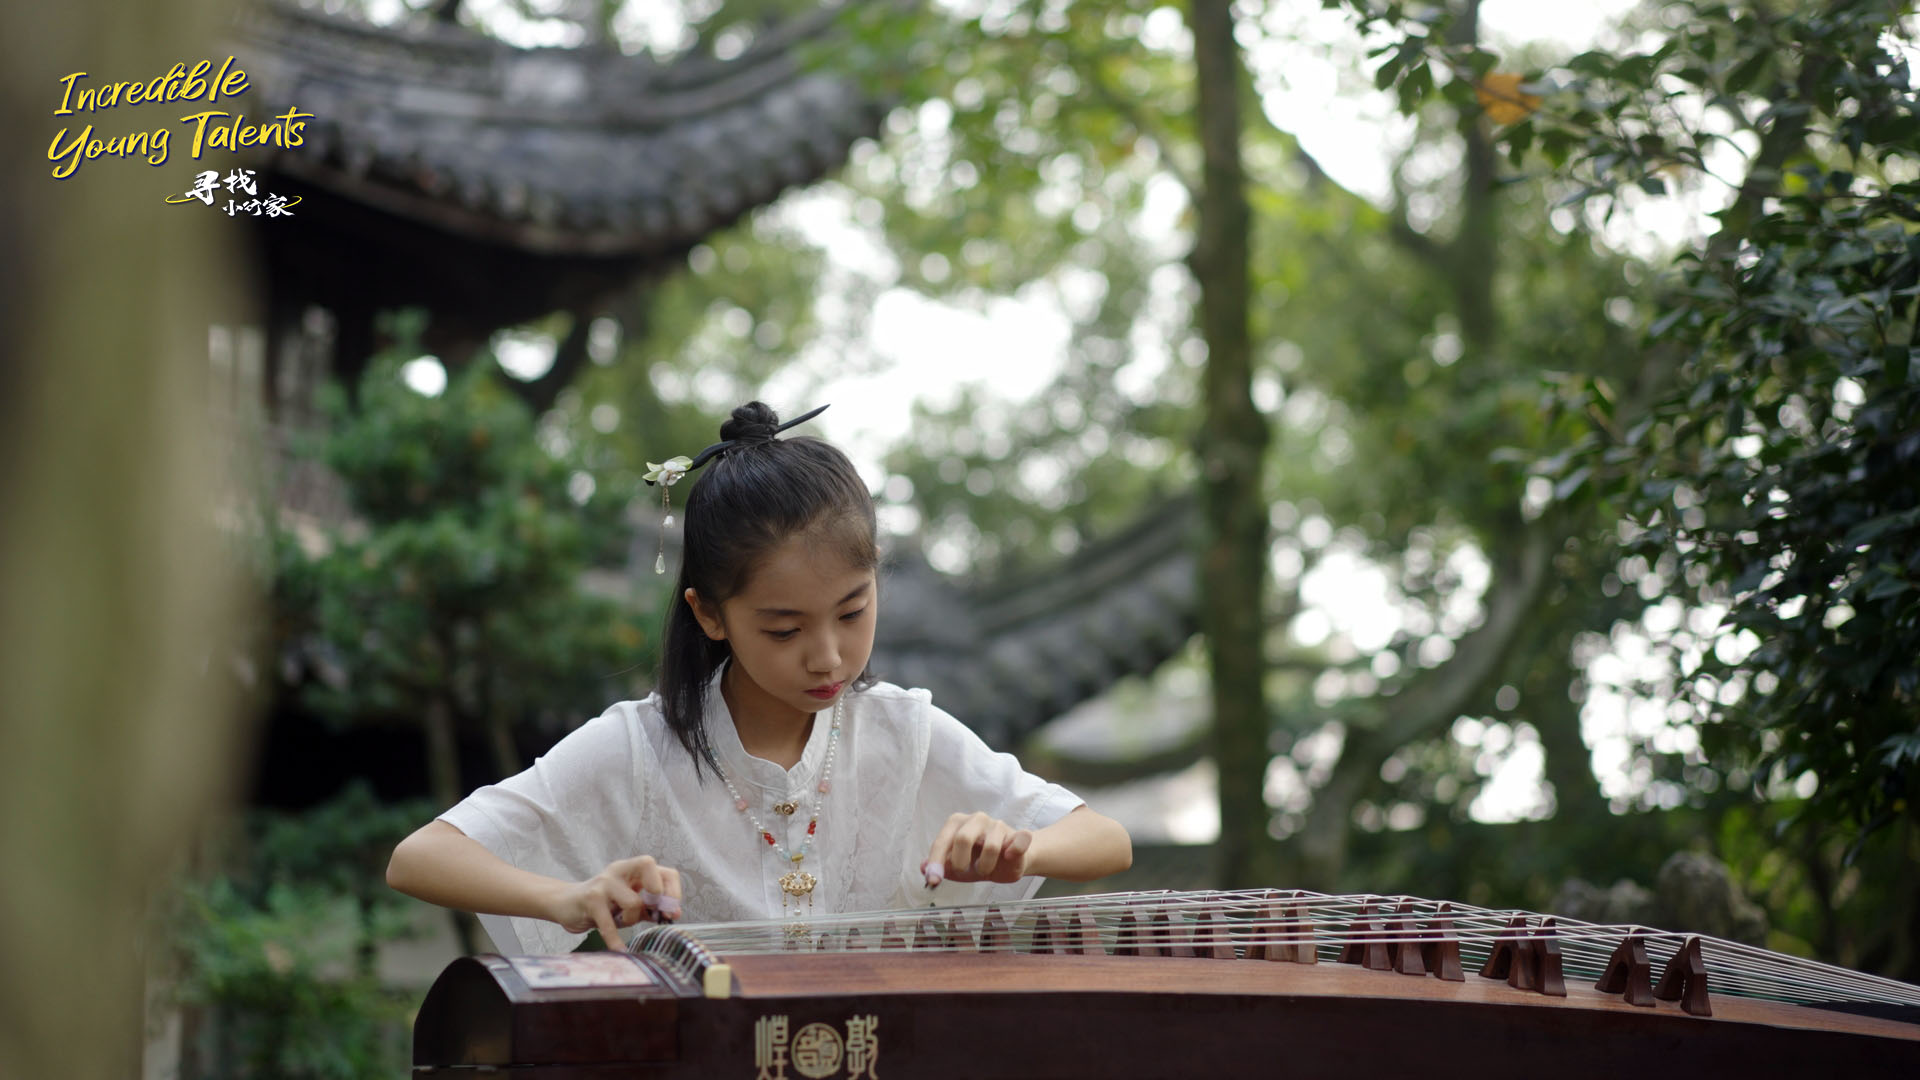 Off the opera stage, Wang Yuhan likes to play guzheng, a traditional Chinese plucked instrument. She says she loves Chinese culture and wants to pursue an art career one day and become an inheritor. /CGTN